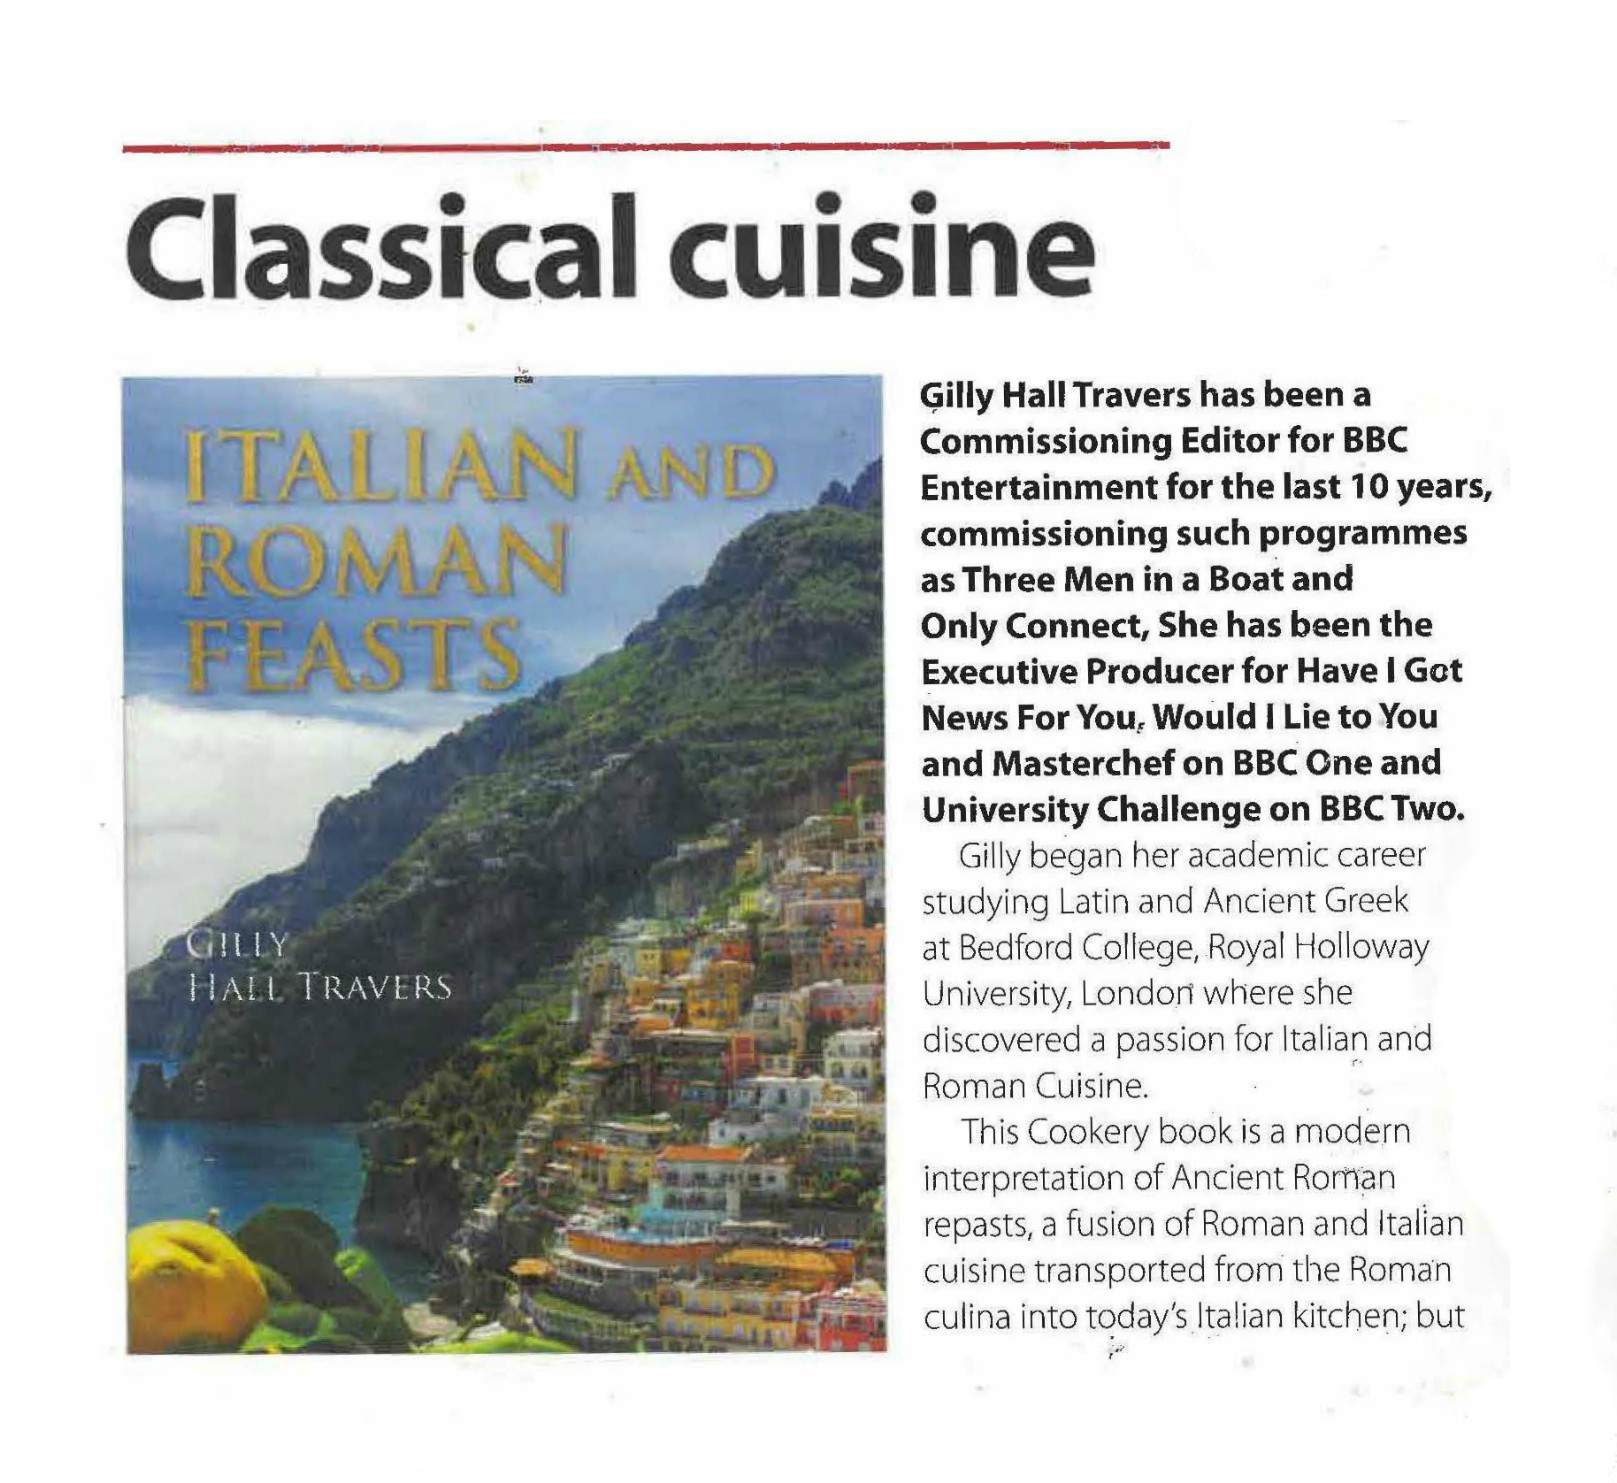 ‘Italian and Roman Feasts’ by Gilly Hall Travers featured in Magazine